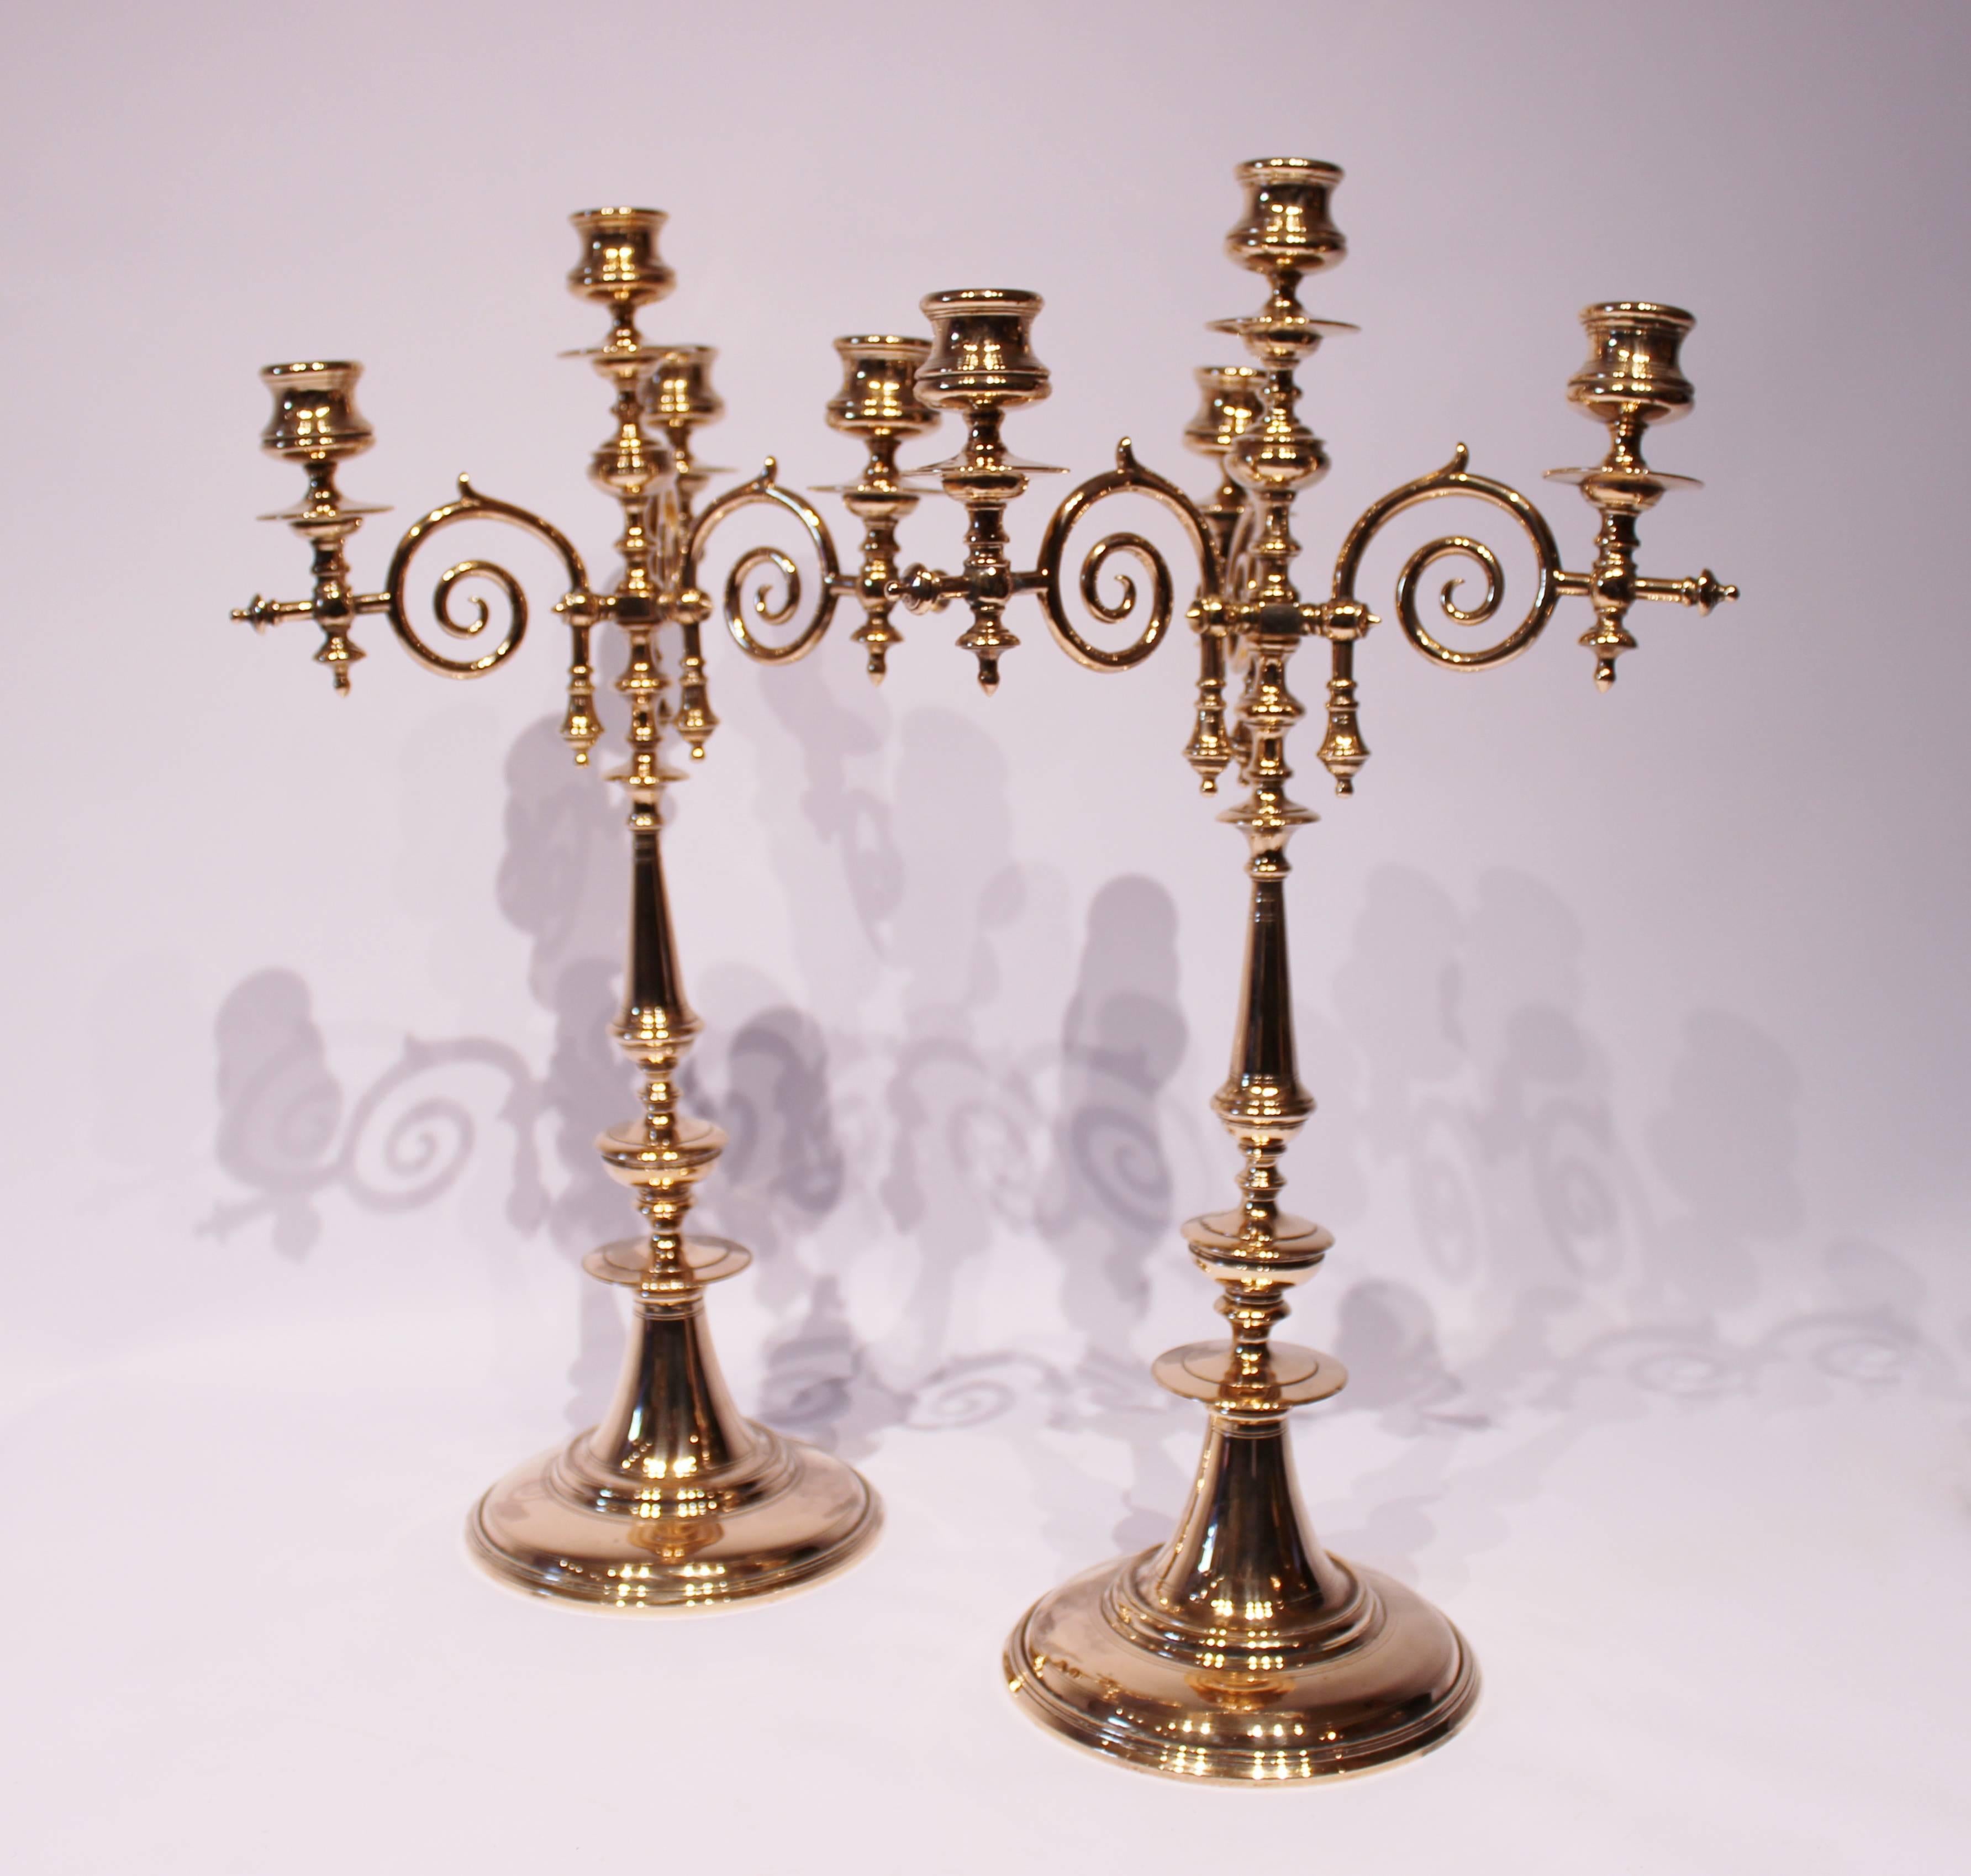 A pair of tall four-armed brass candlesticks, in great vintage condition from circa 1880s.